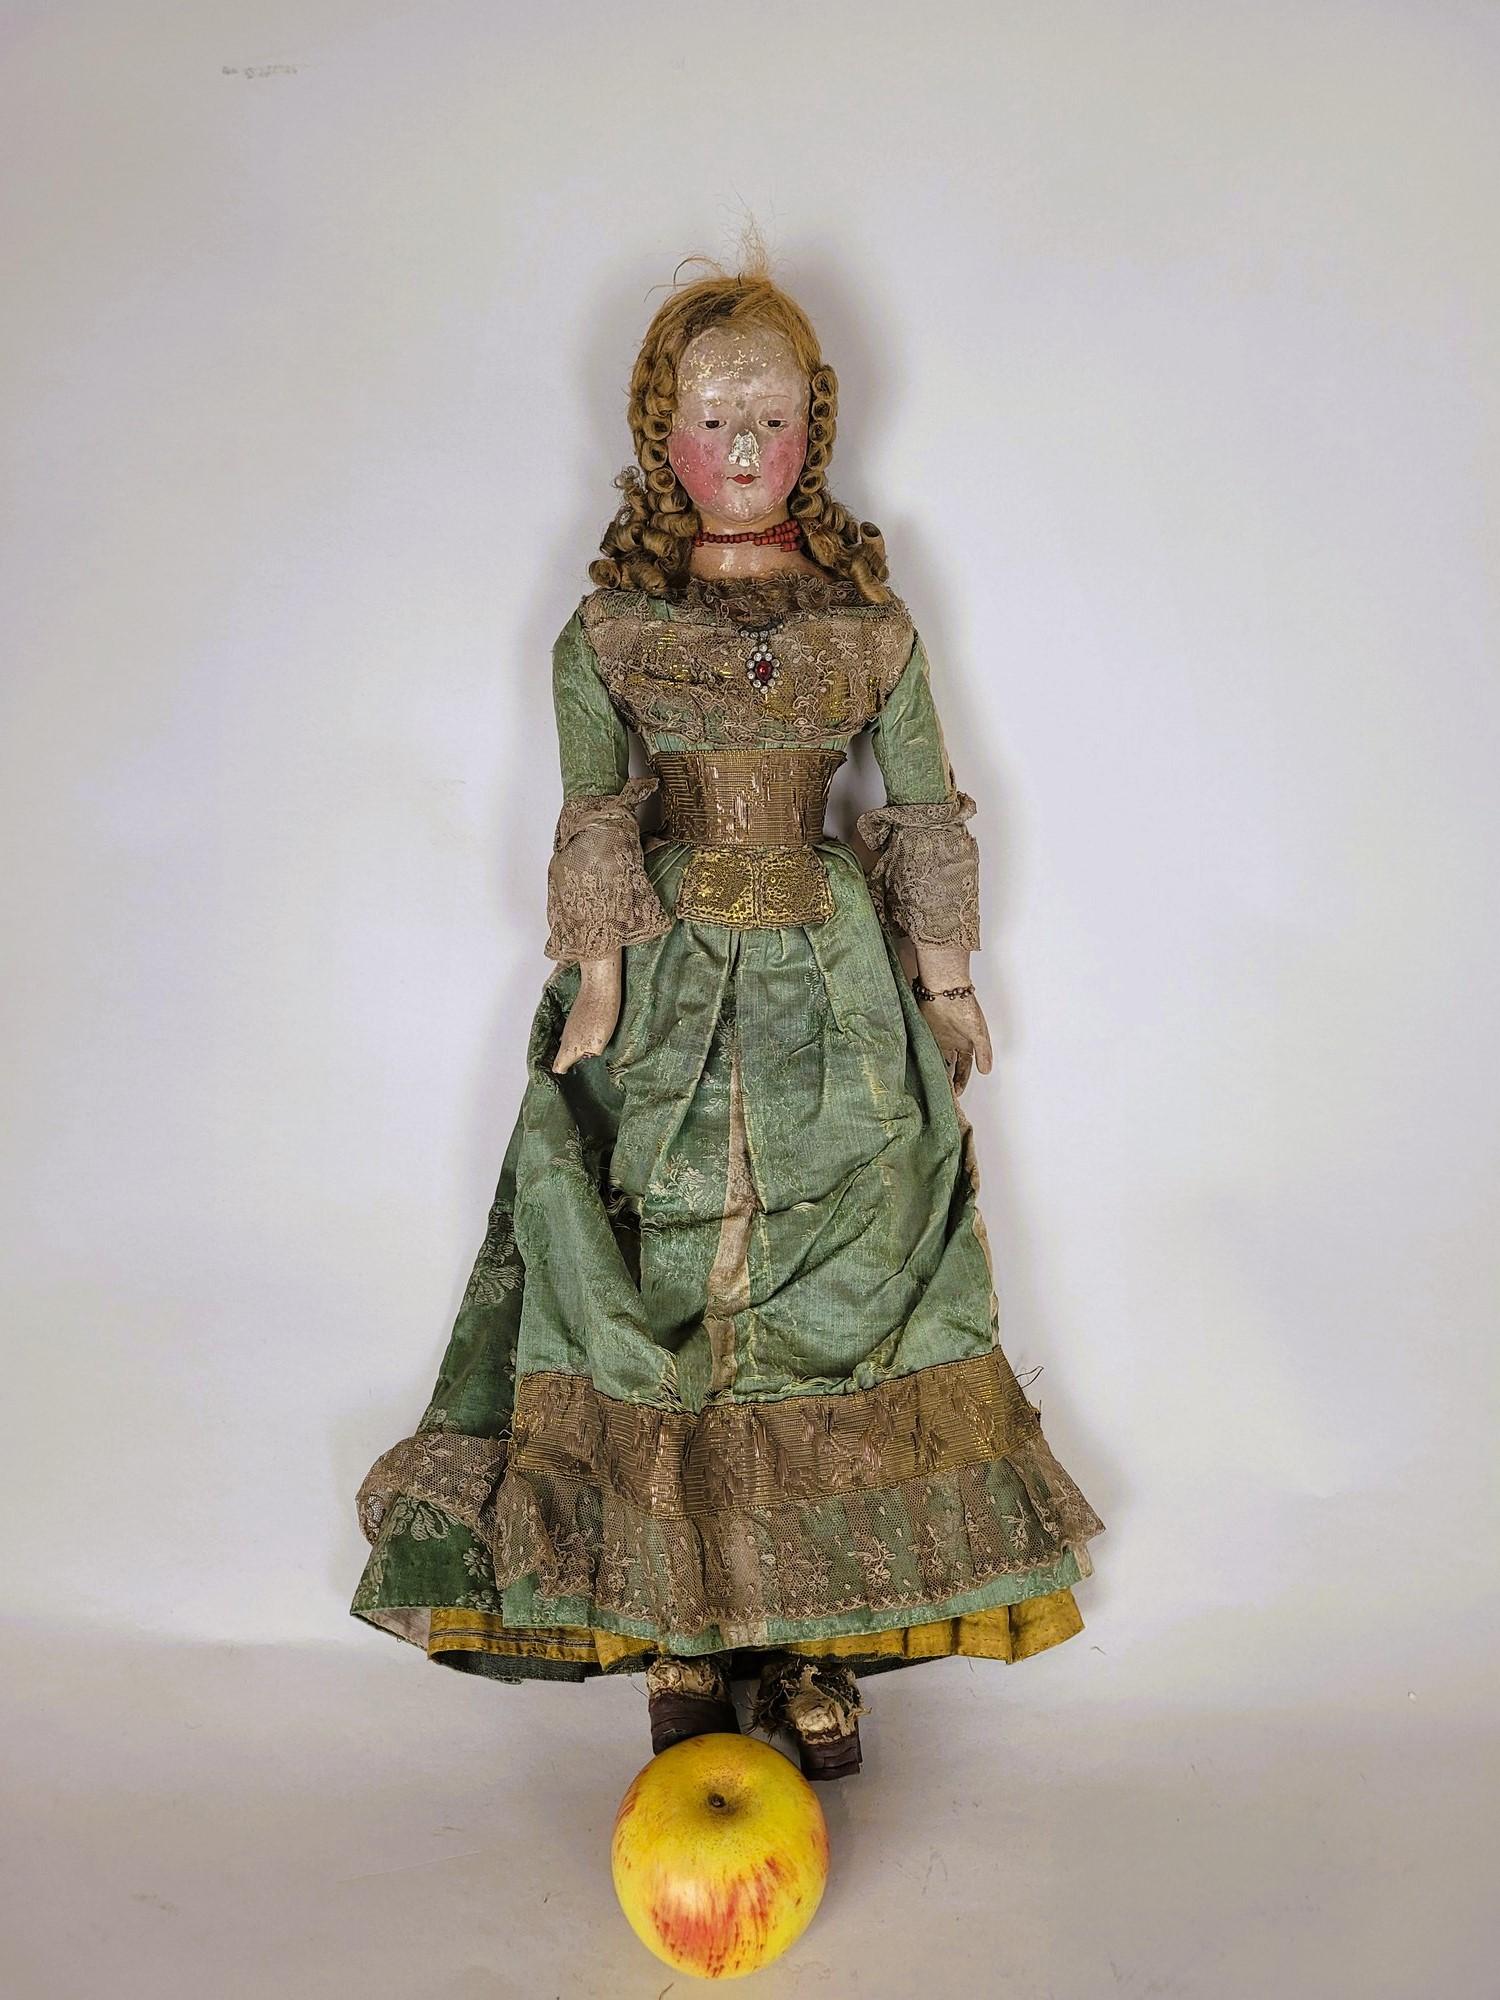 Very beautiful doll with a papier-mâché head and a wooden body, articulated.

She wears a superb green dress, embroidered with silver/gold thread and lace.

Her very elegant outfit is enhanced with jewelry (coral necklace) and an elaborate